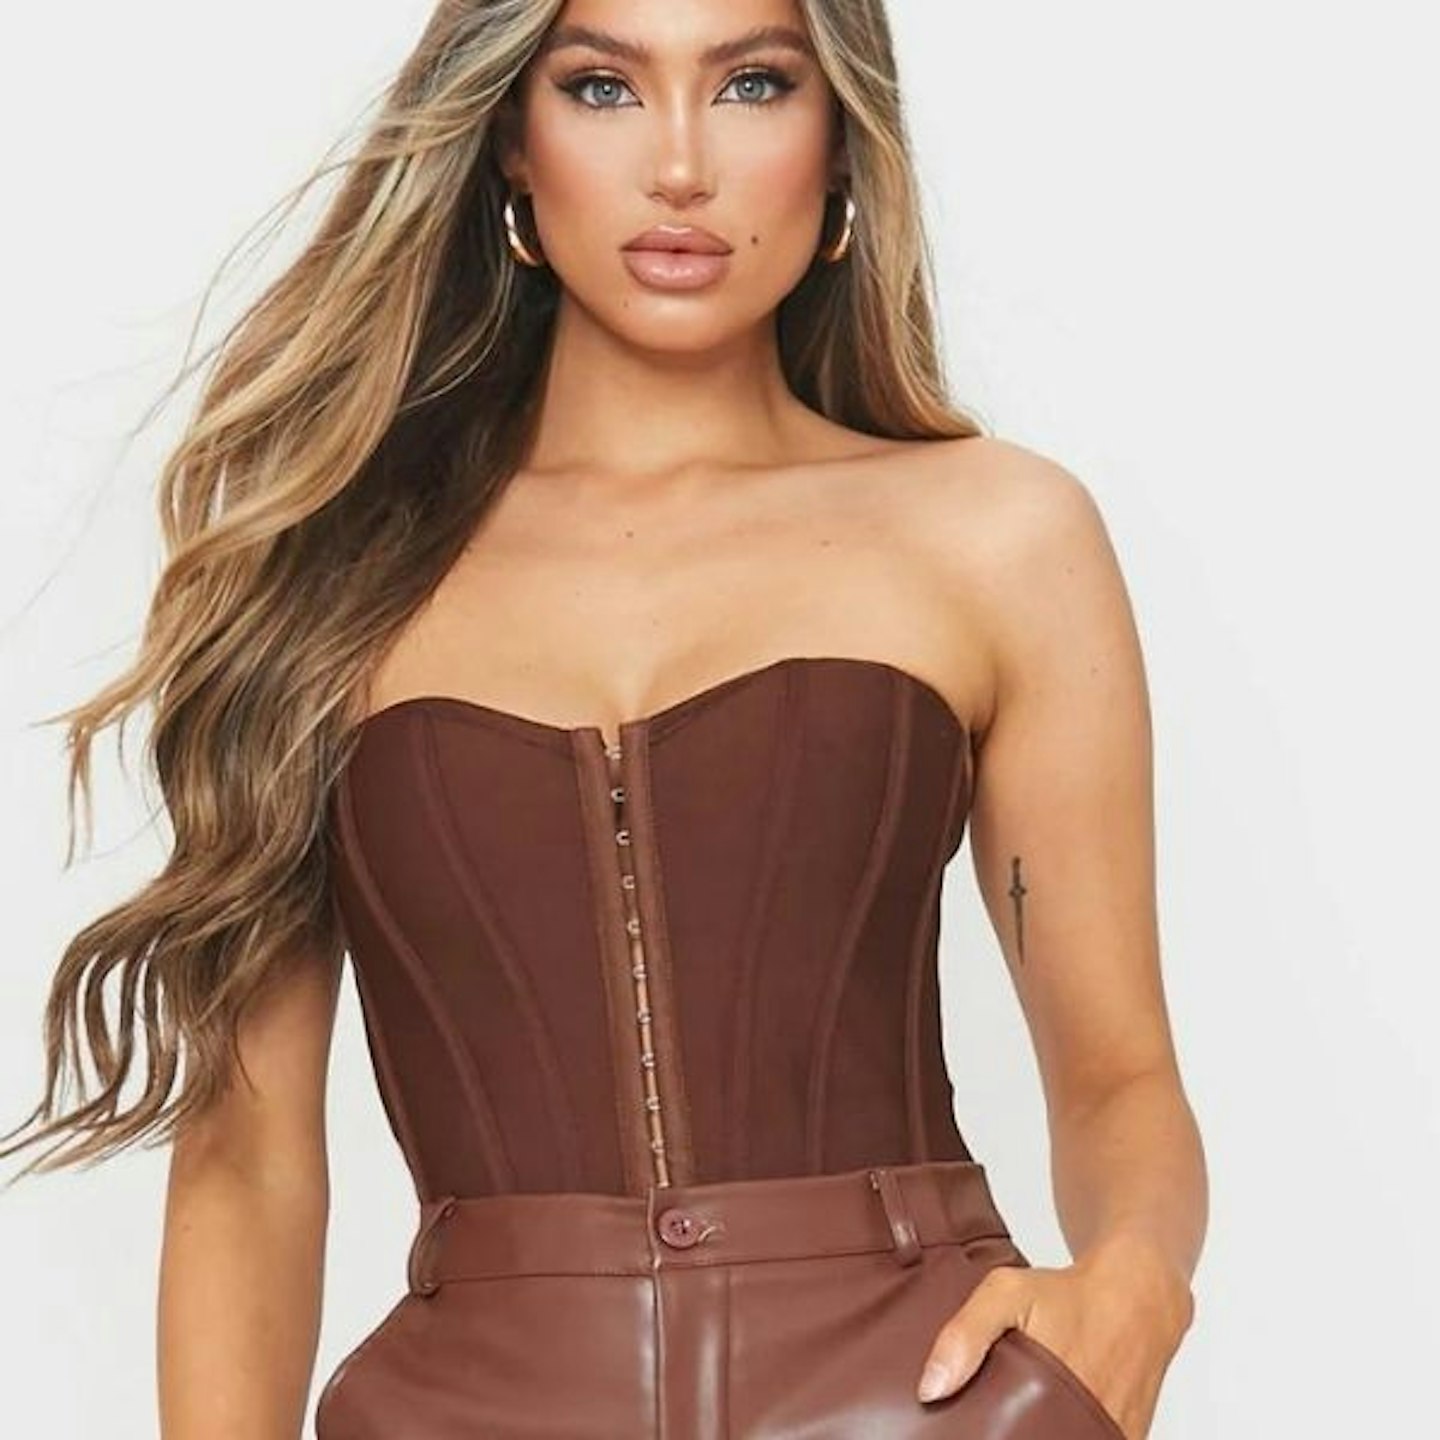 ✨ VIRAL PLT CORSETS ✨ I spoke about these a while ago and now they've